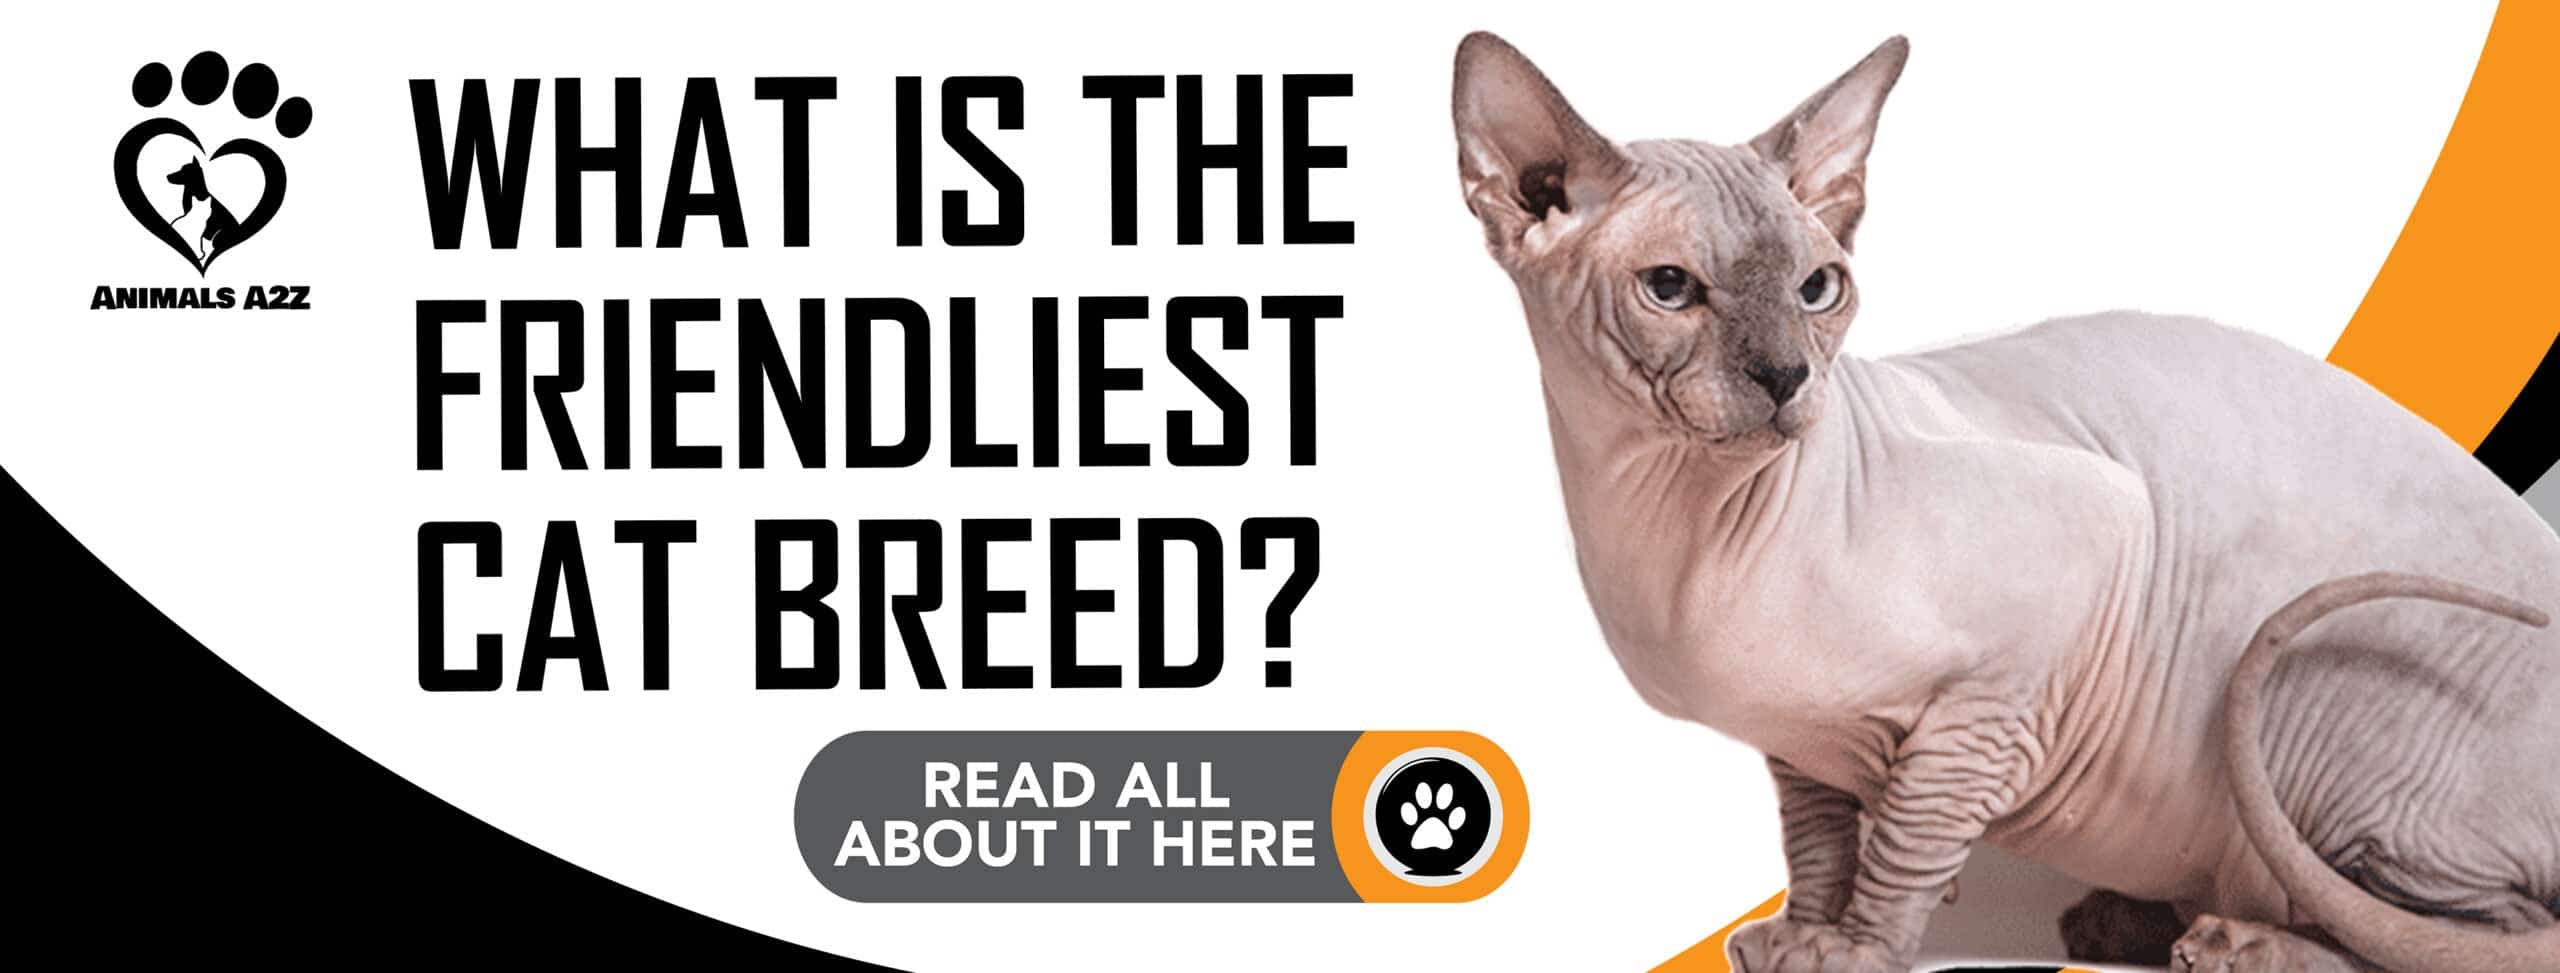 What is the friendliest cat breed